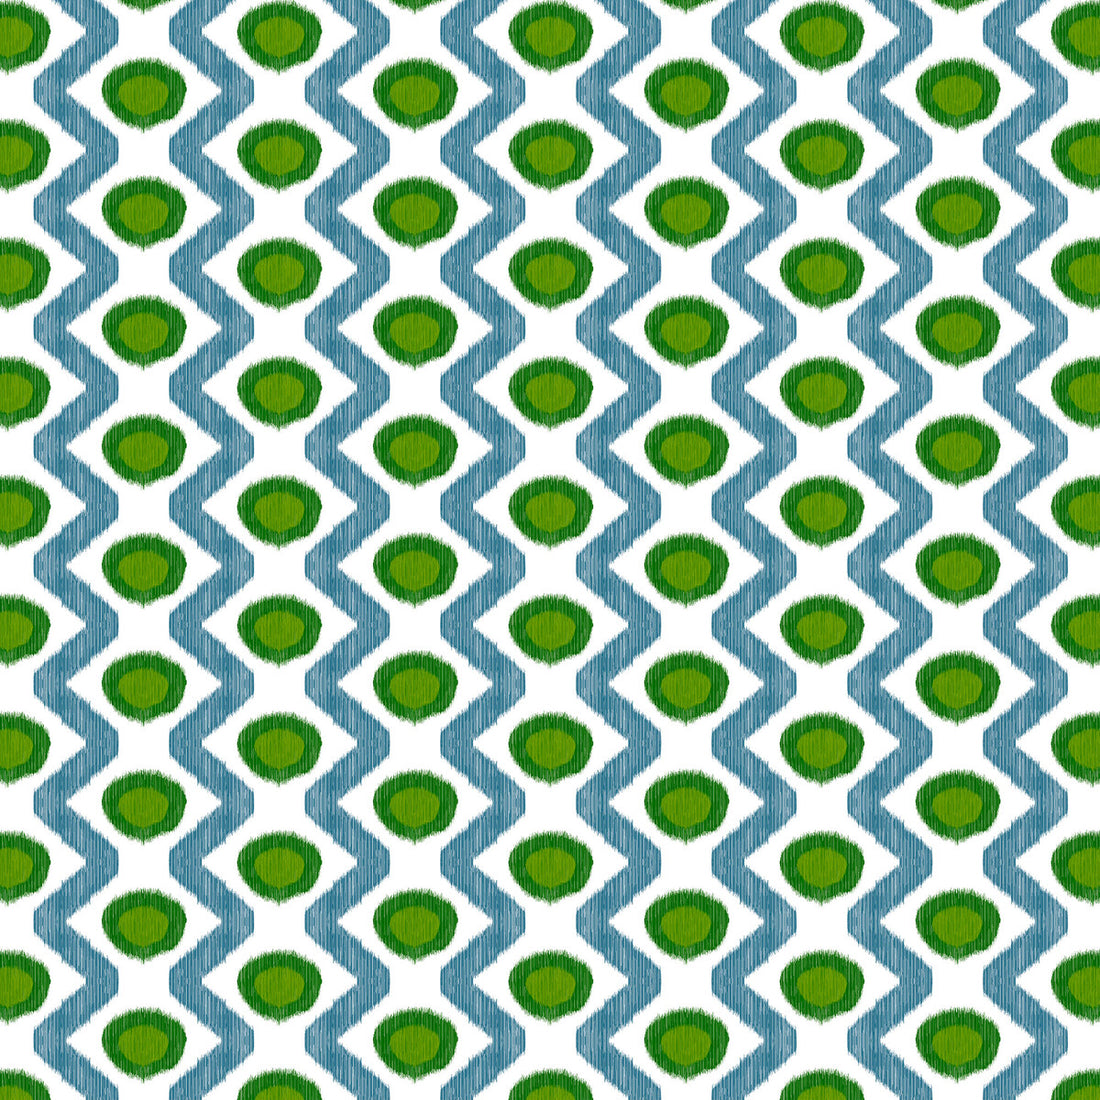 Cala Marsal fabric in verde azul color - pattern GDT5681.001.0 - by Gaston y Daniela in the Gaston Maiorica collection